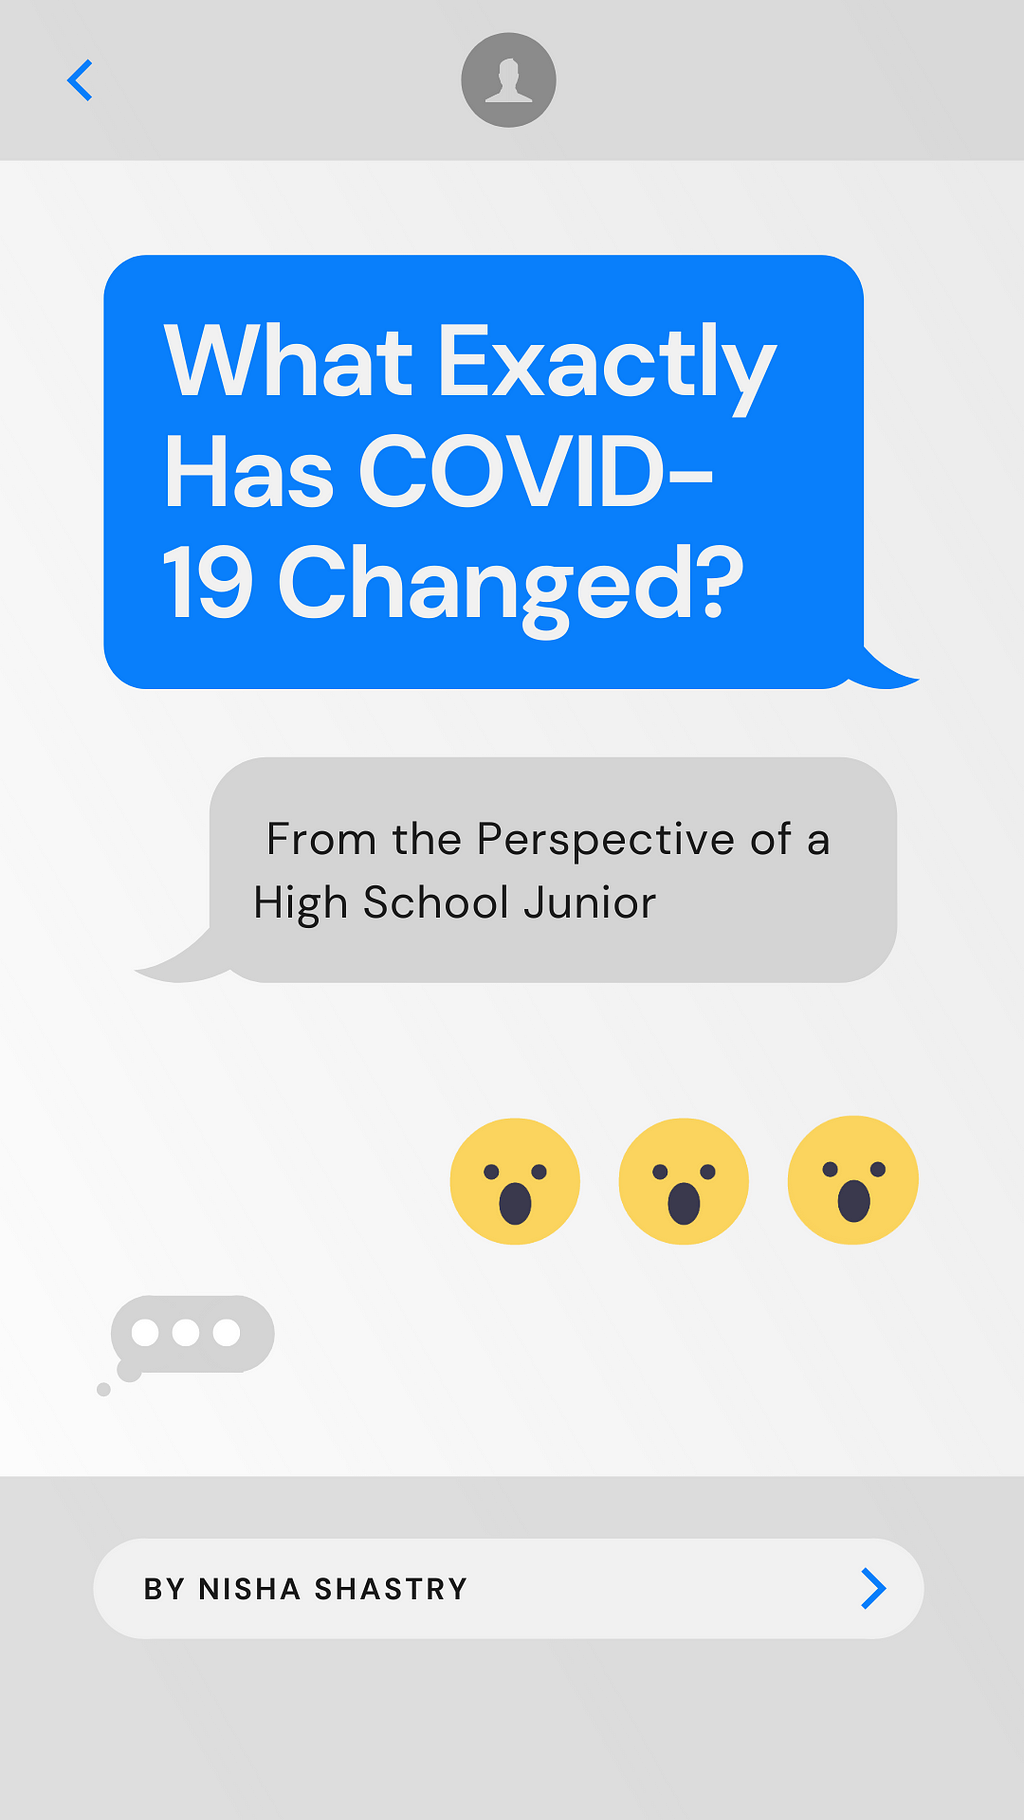 What exactly has COVID-19 changed for high schoolers?